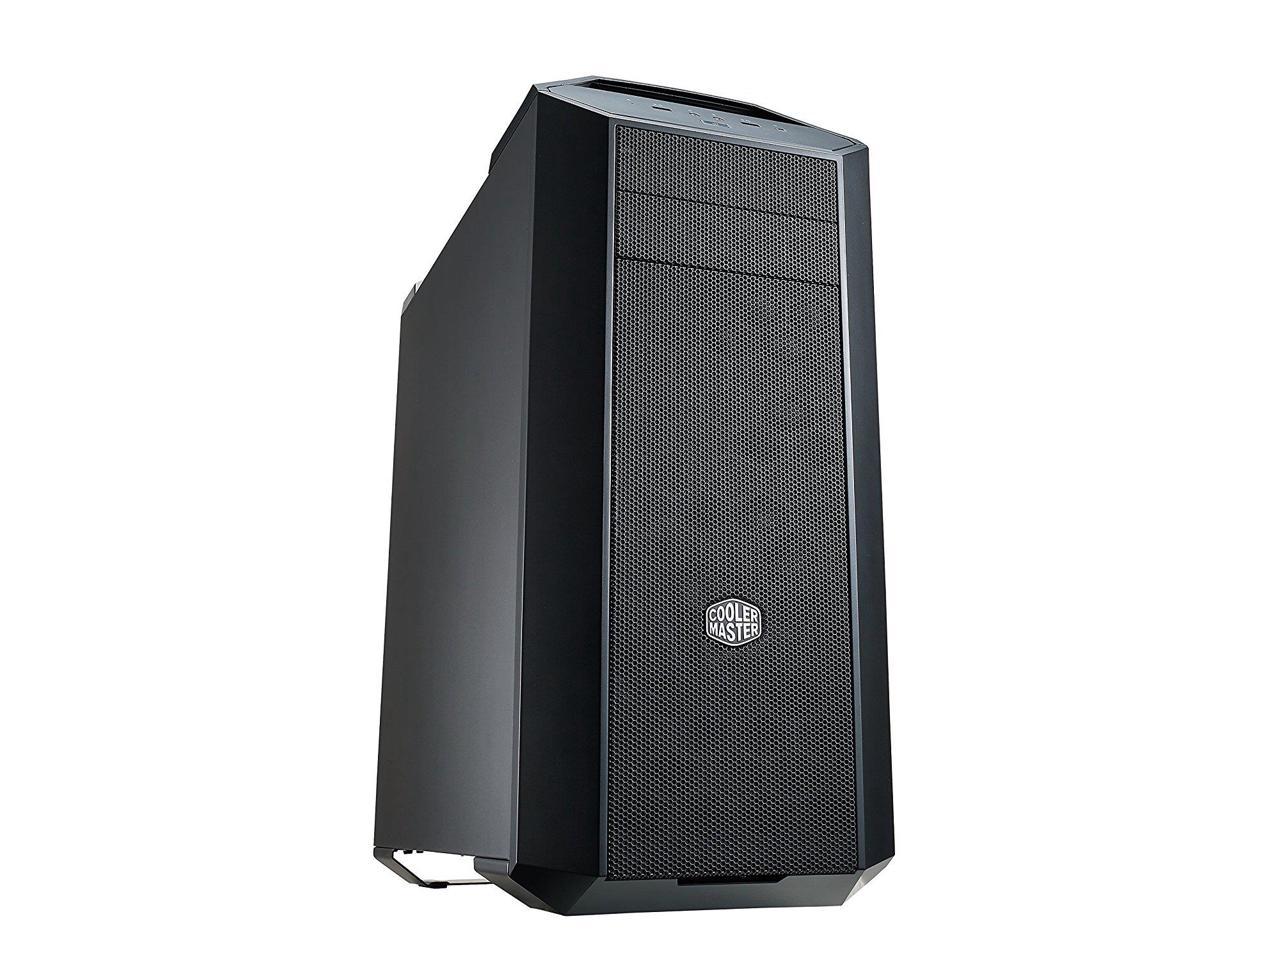 Adamant Custom 8-Core 3D Modelling SolidWorks CAD CAE CAM Workstation Computer AMD Ryzen 7 3700X 3.6Ghz X570 64Gb DDR4 RAM 8TB HDD 4TB SSD 750W PSU Wi-Fi Bluetooth Nvidia Quadro RTX 4000 8Gb Be the first to review this product...